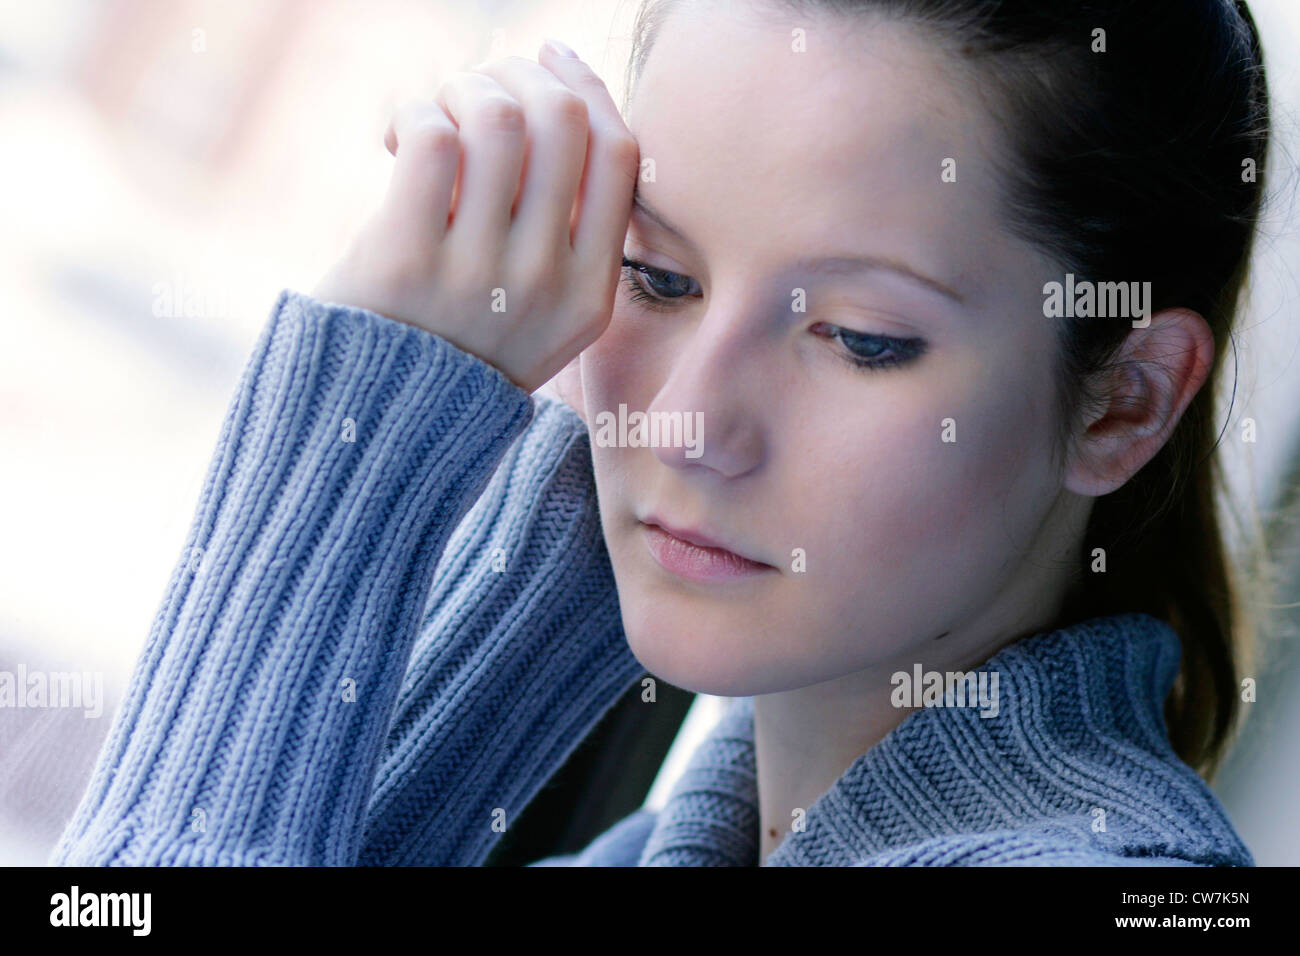 young absent-minded woman at a window Stock Photo